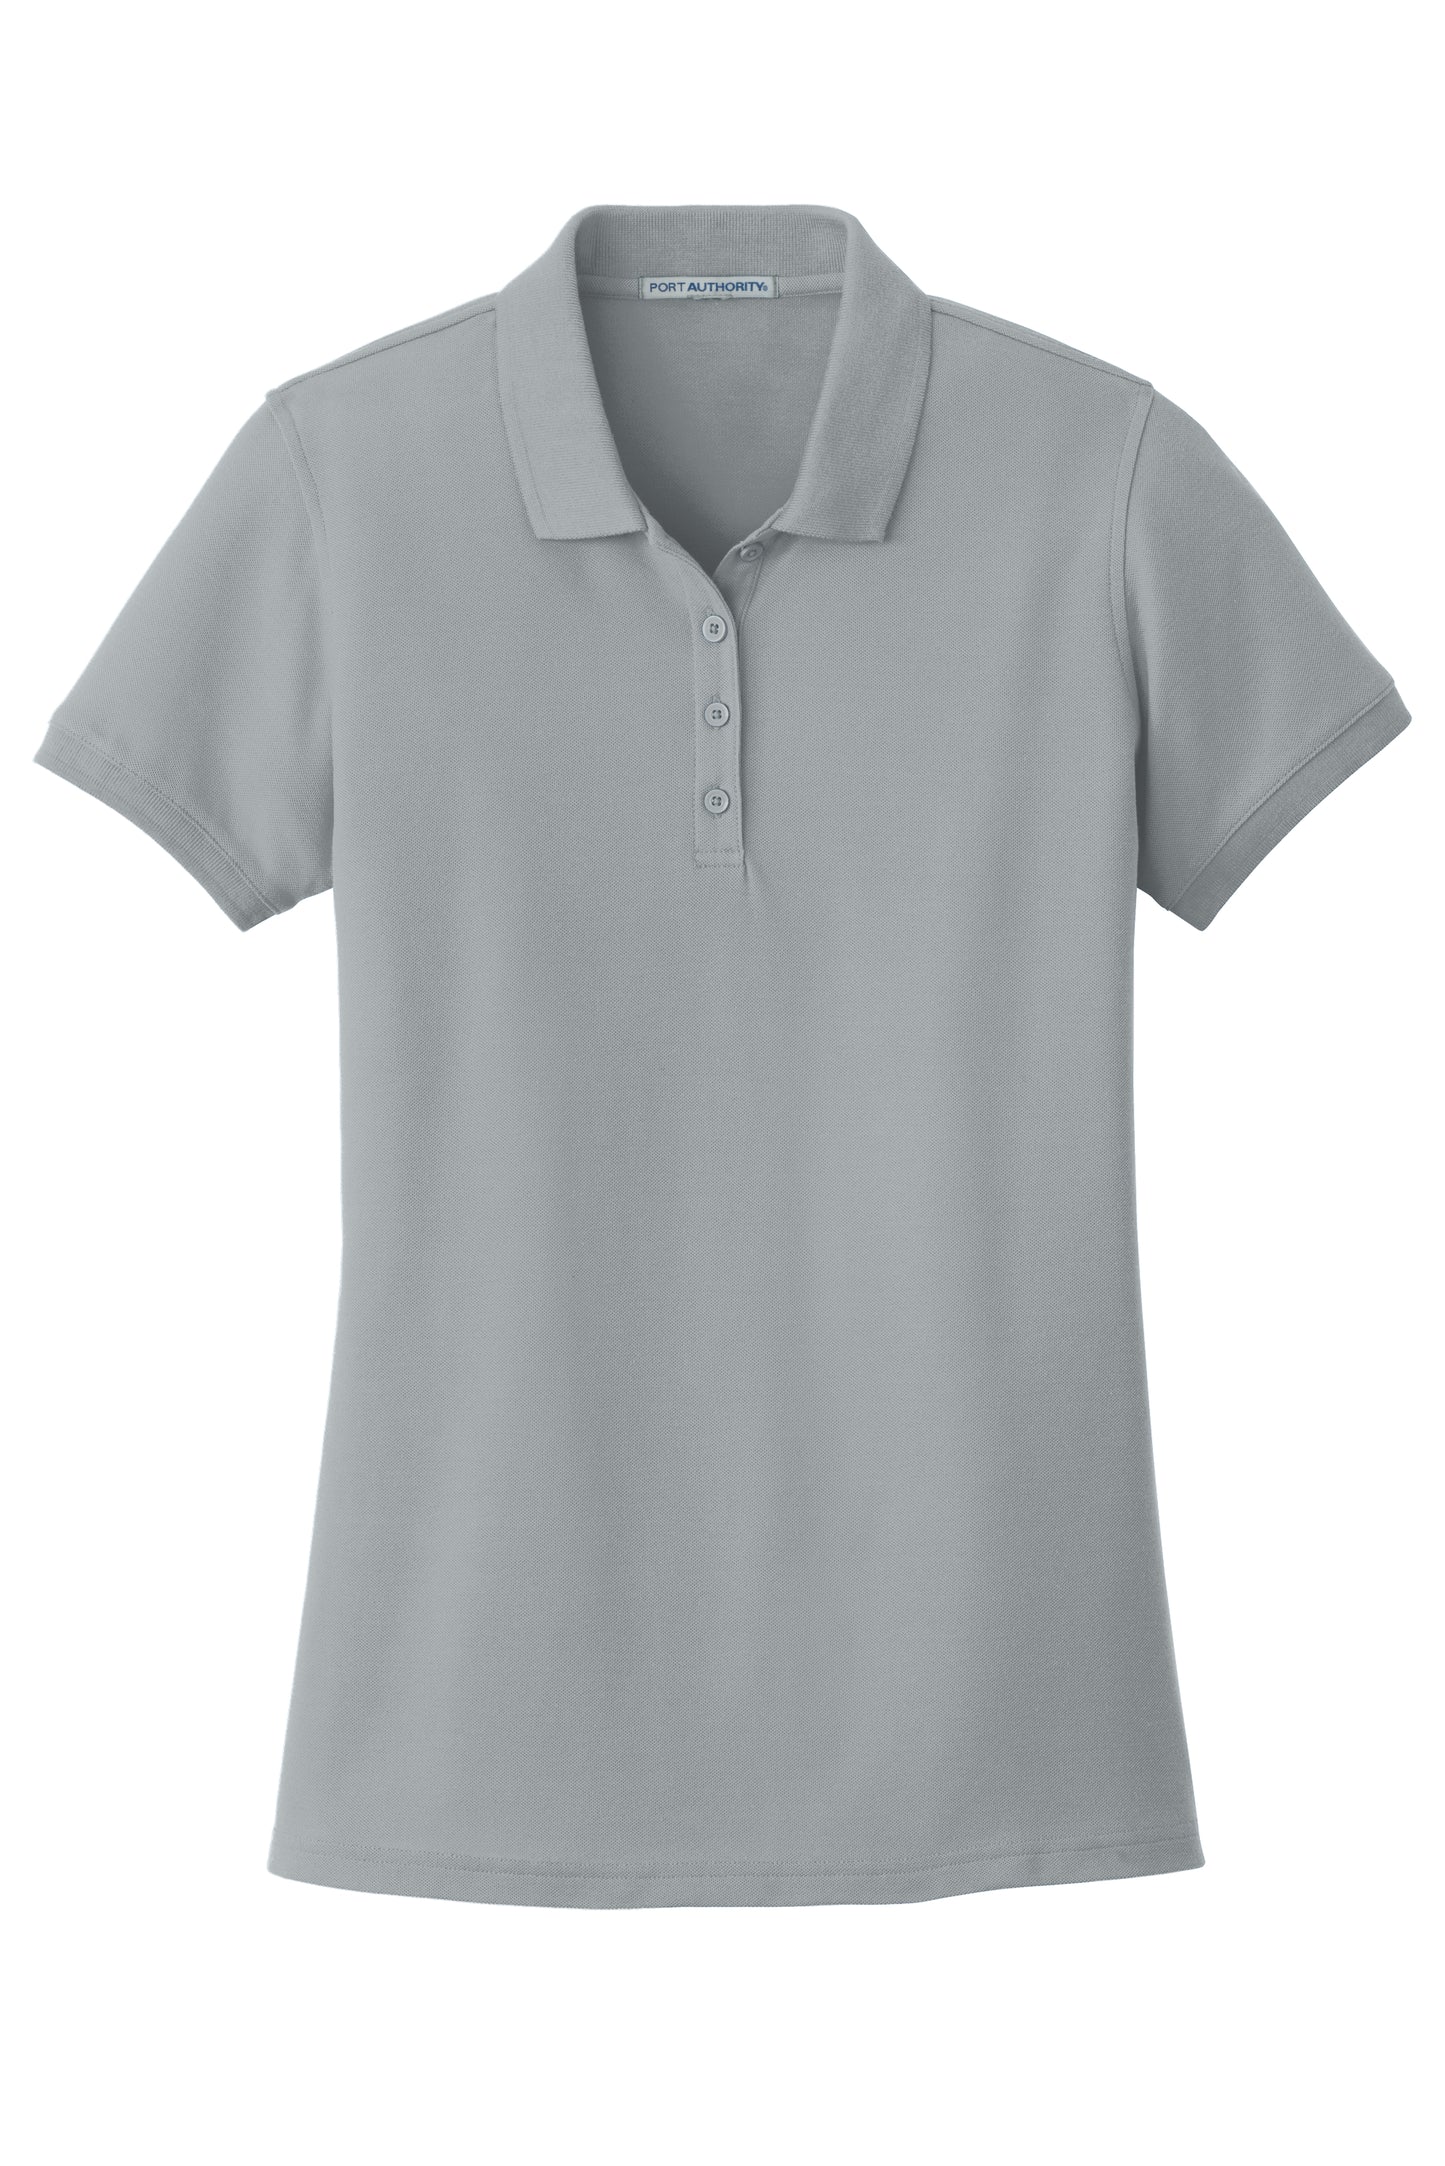 port authority womens classic pique polo gusty grey